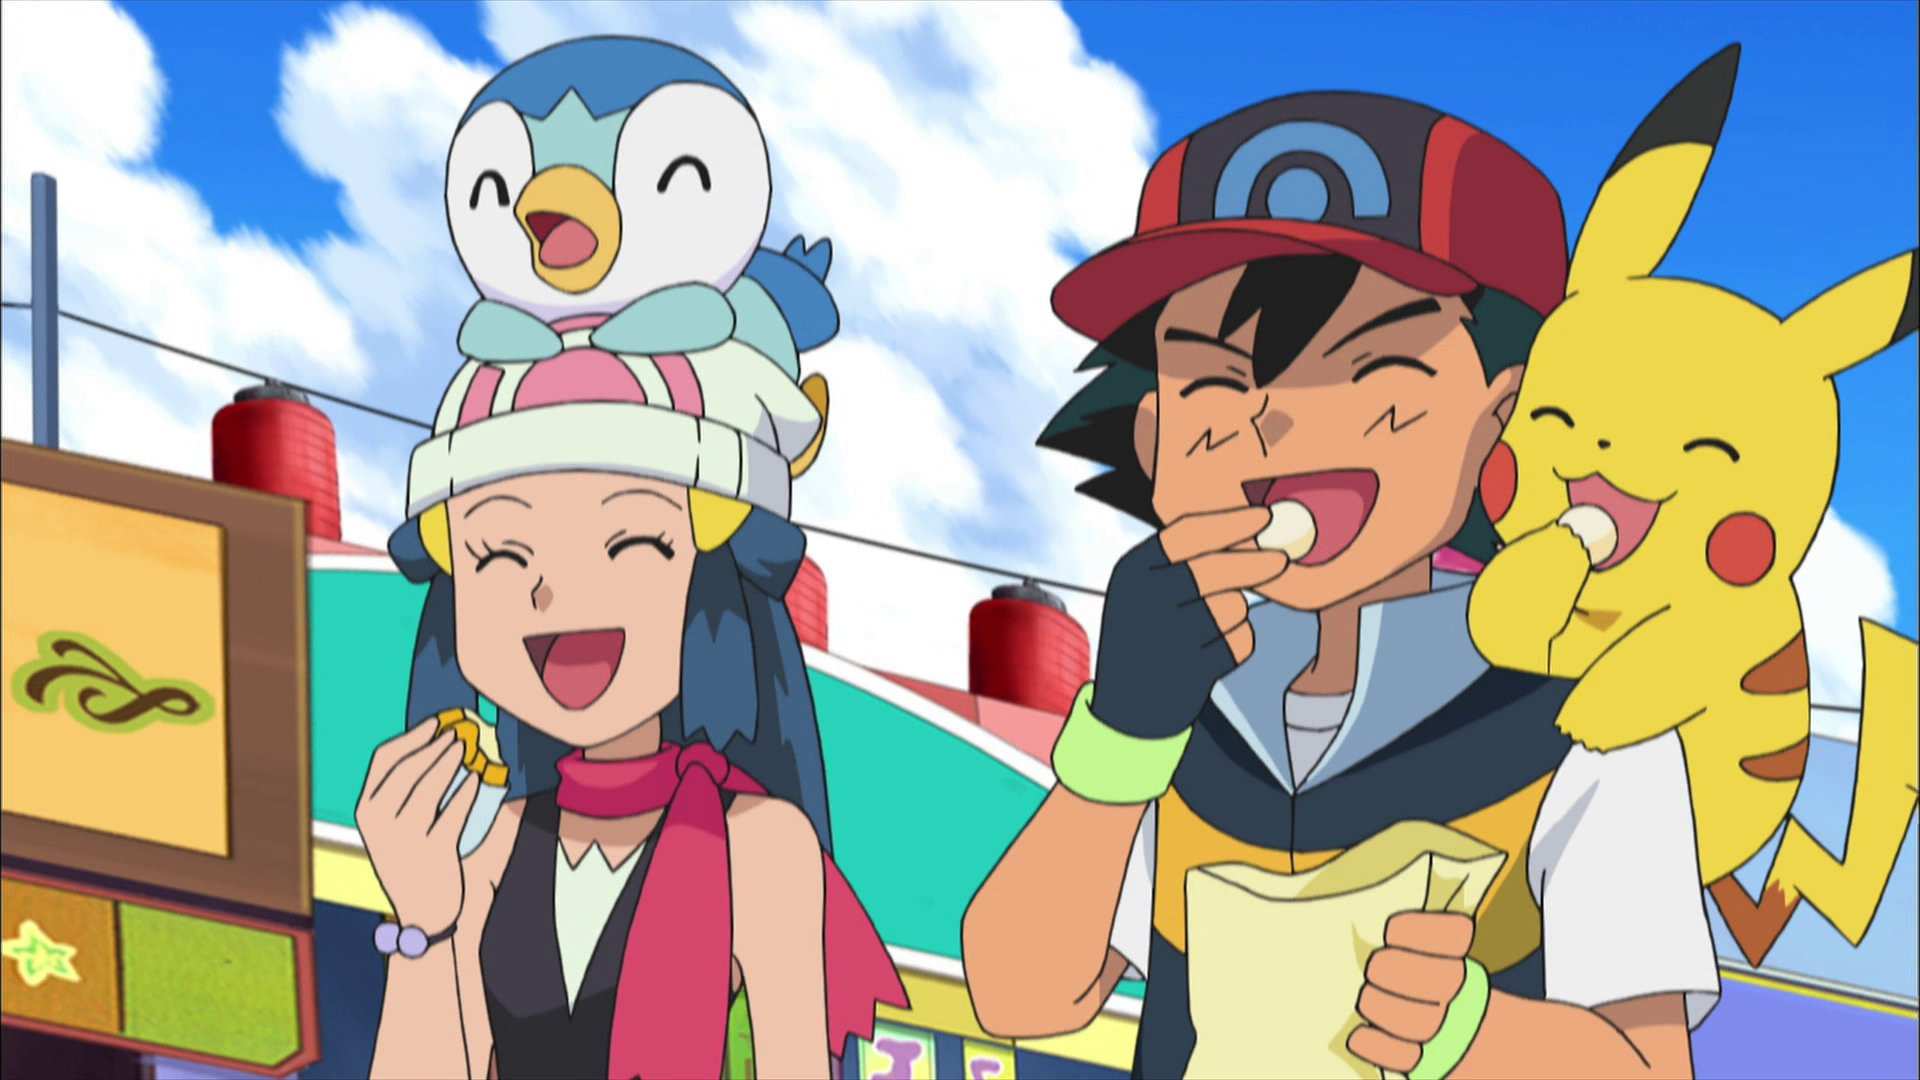 Pokemon: Top five female characters in the Pokemon anime